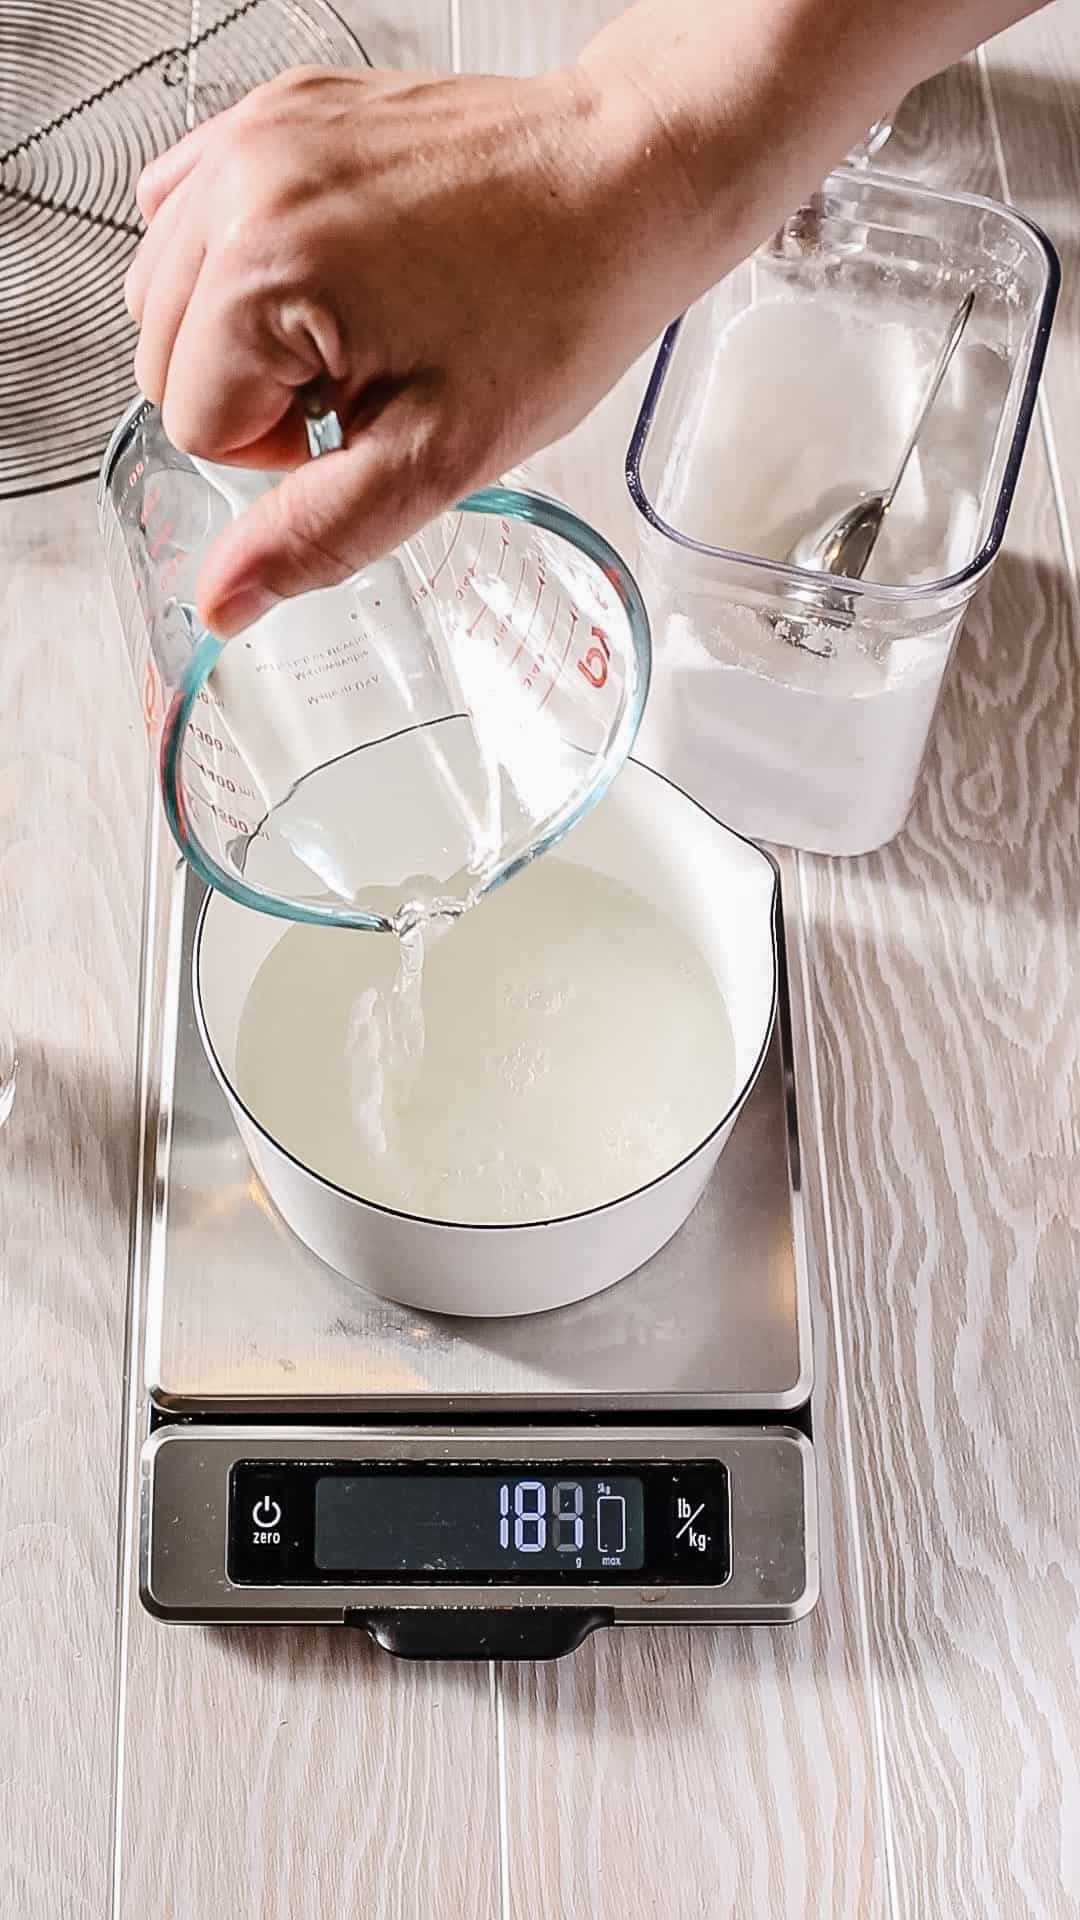 Overhead view of a white saucepan on a kitchen scale. A hand is pouring water from a measuring cup into the saucepan.